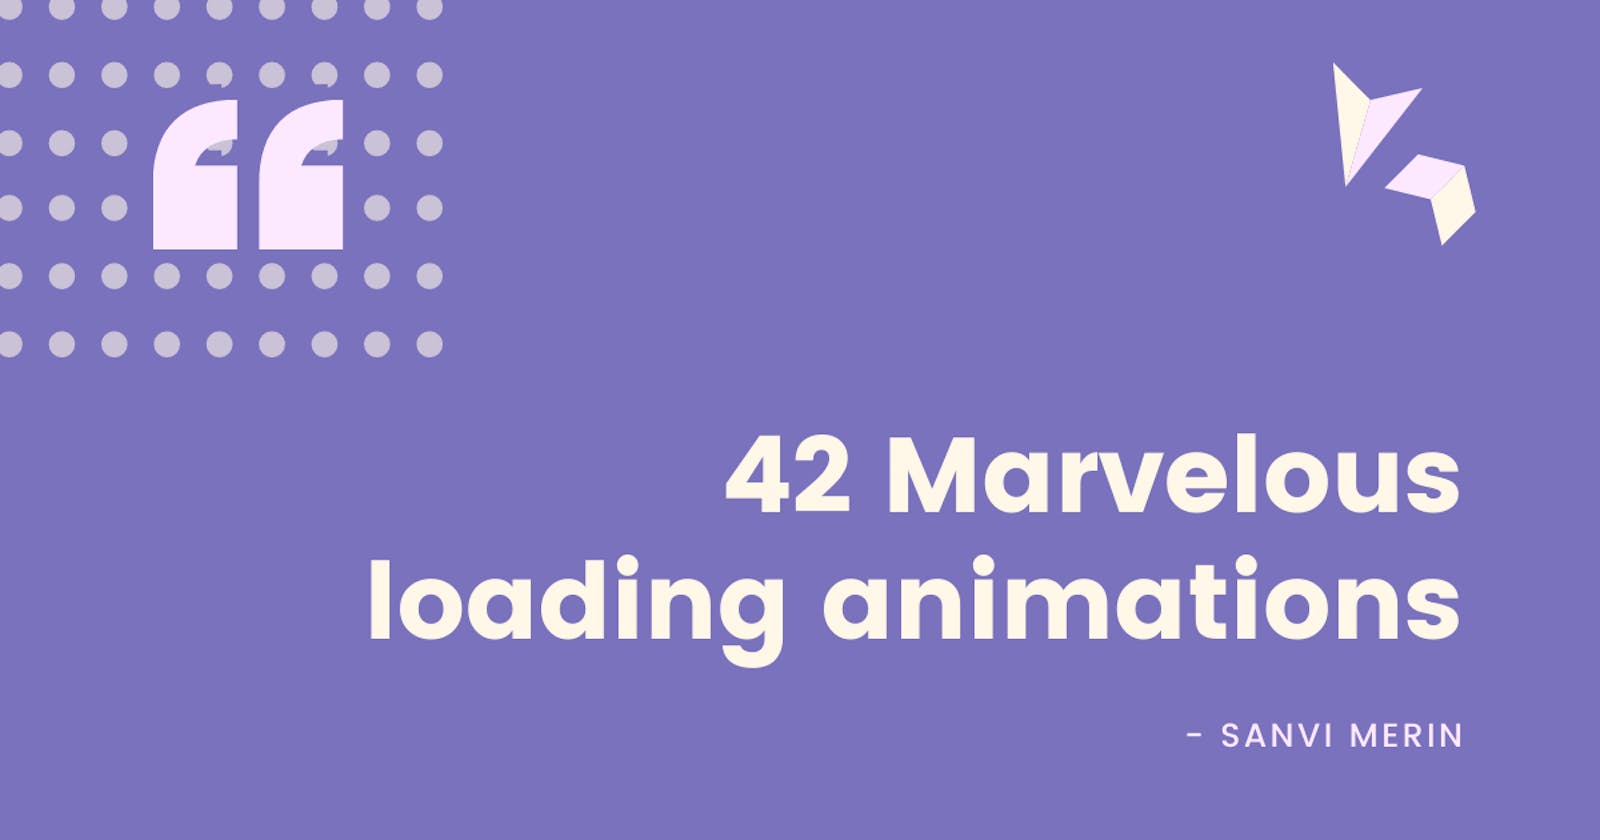 42 Marvelous loading animations for your website